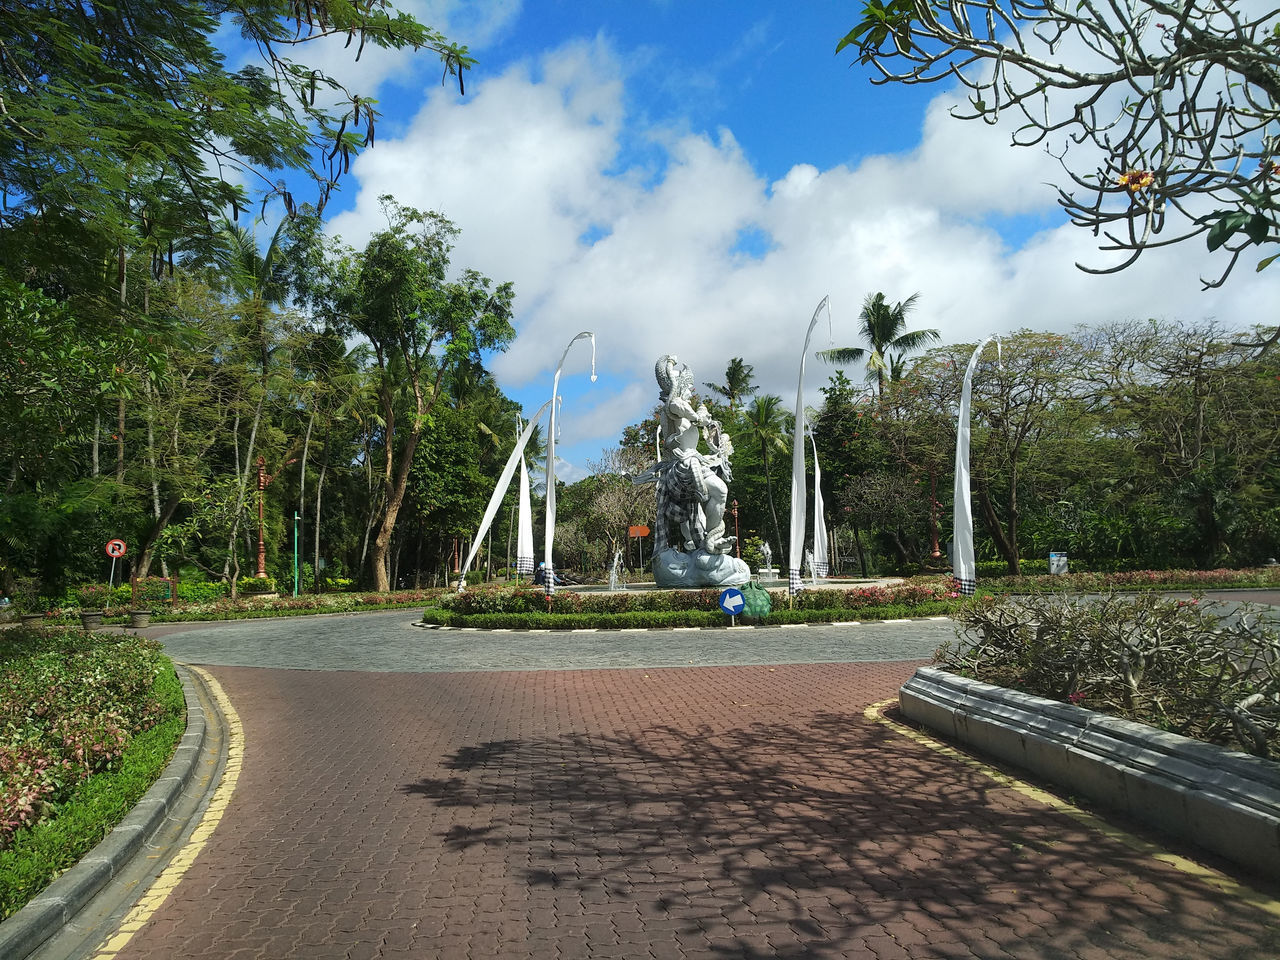 VIEW OF PARK AGAINST CLOUDY SKY